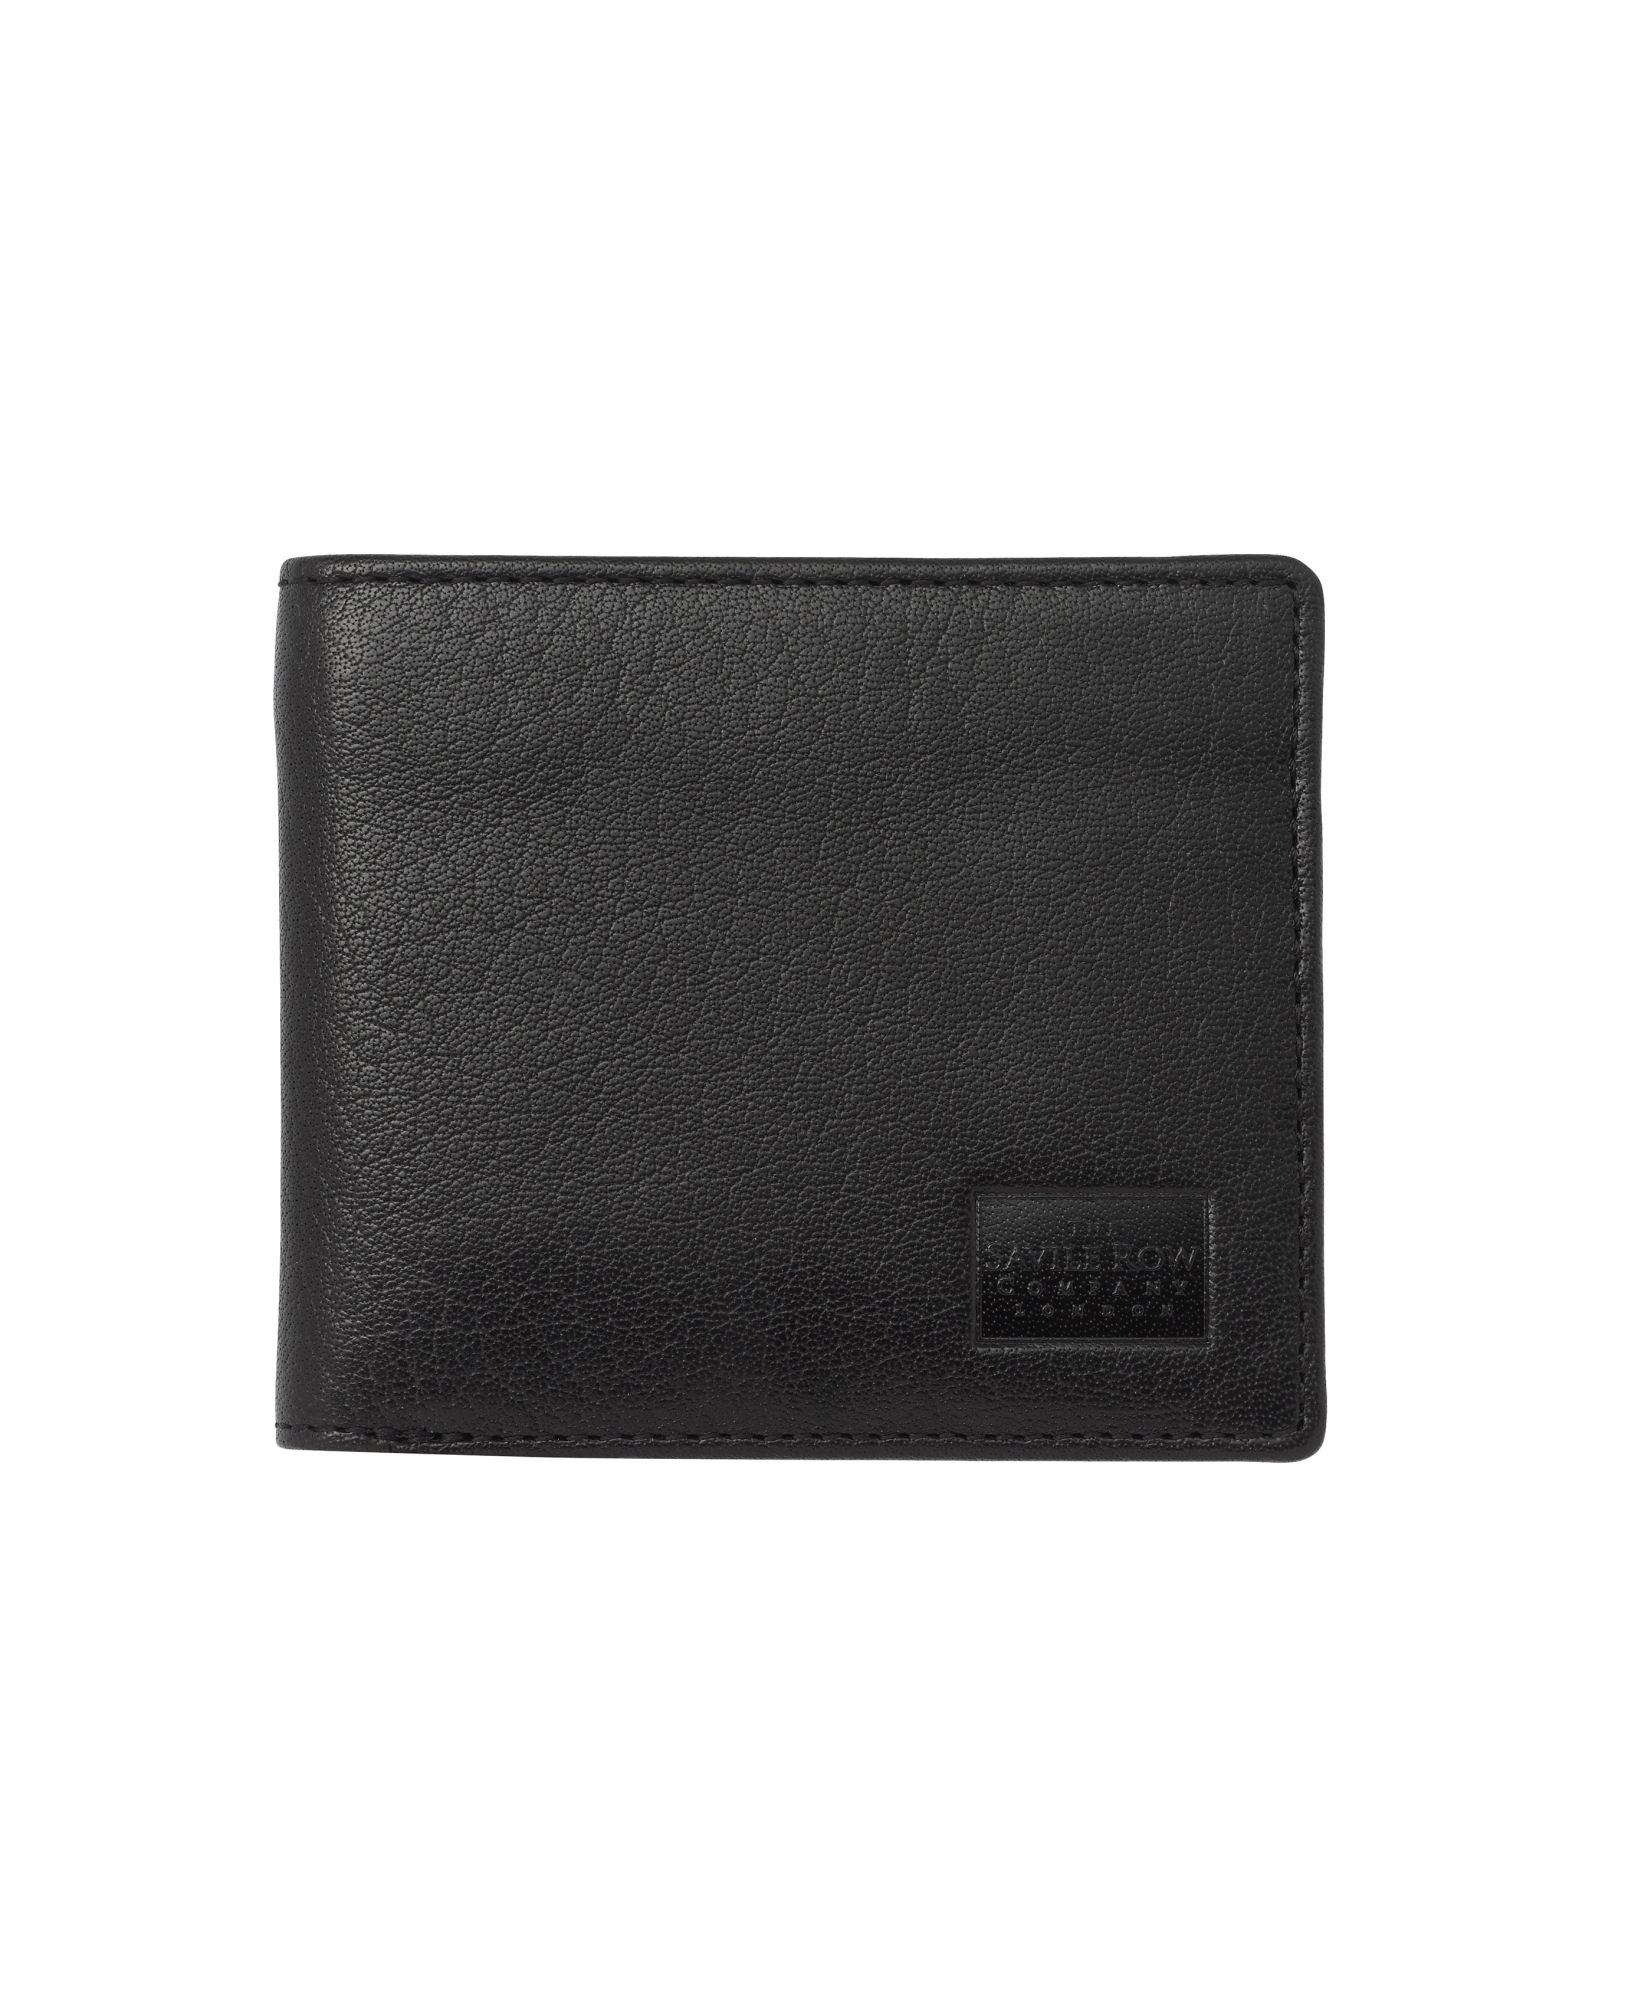 Image of Black Leather Classic Billfold Wallet